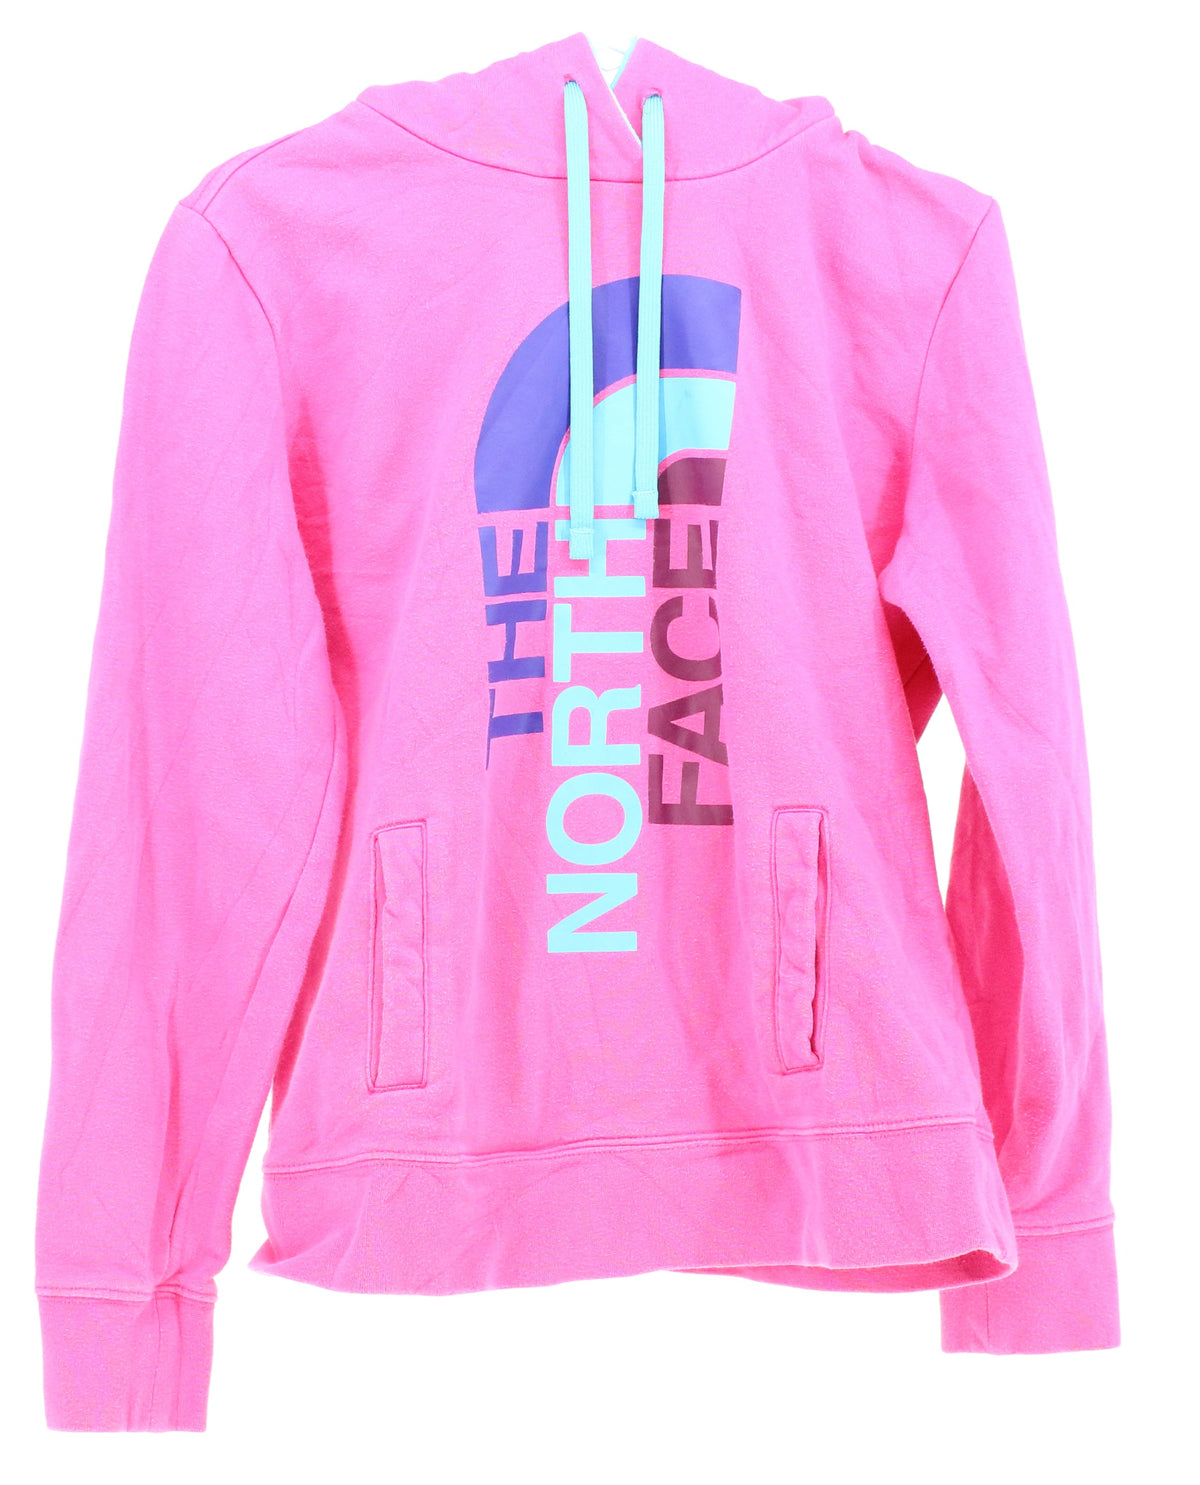 The North Face Pink Hooded Sweathshirt with large center logo